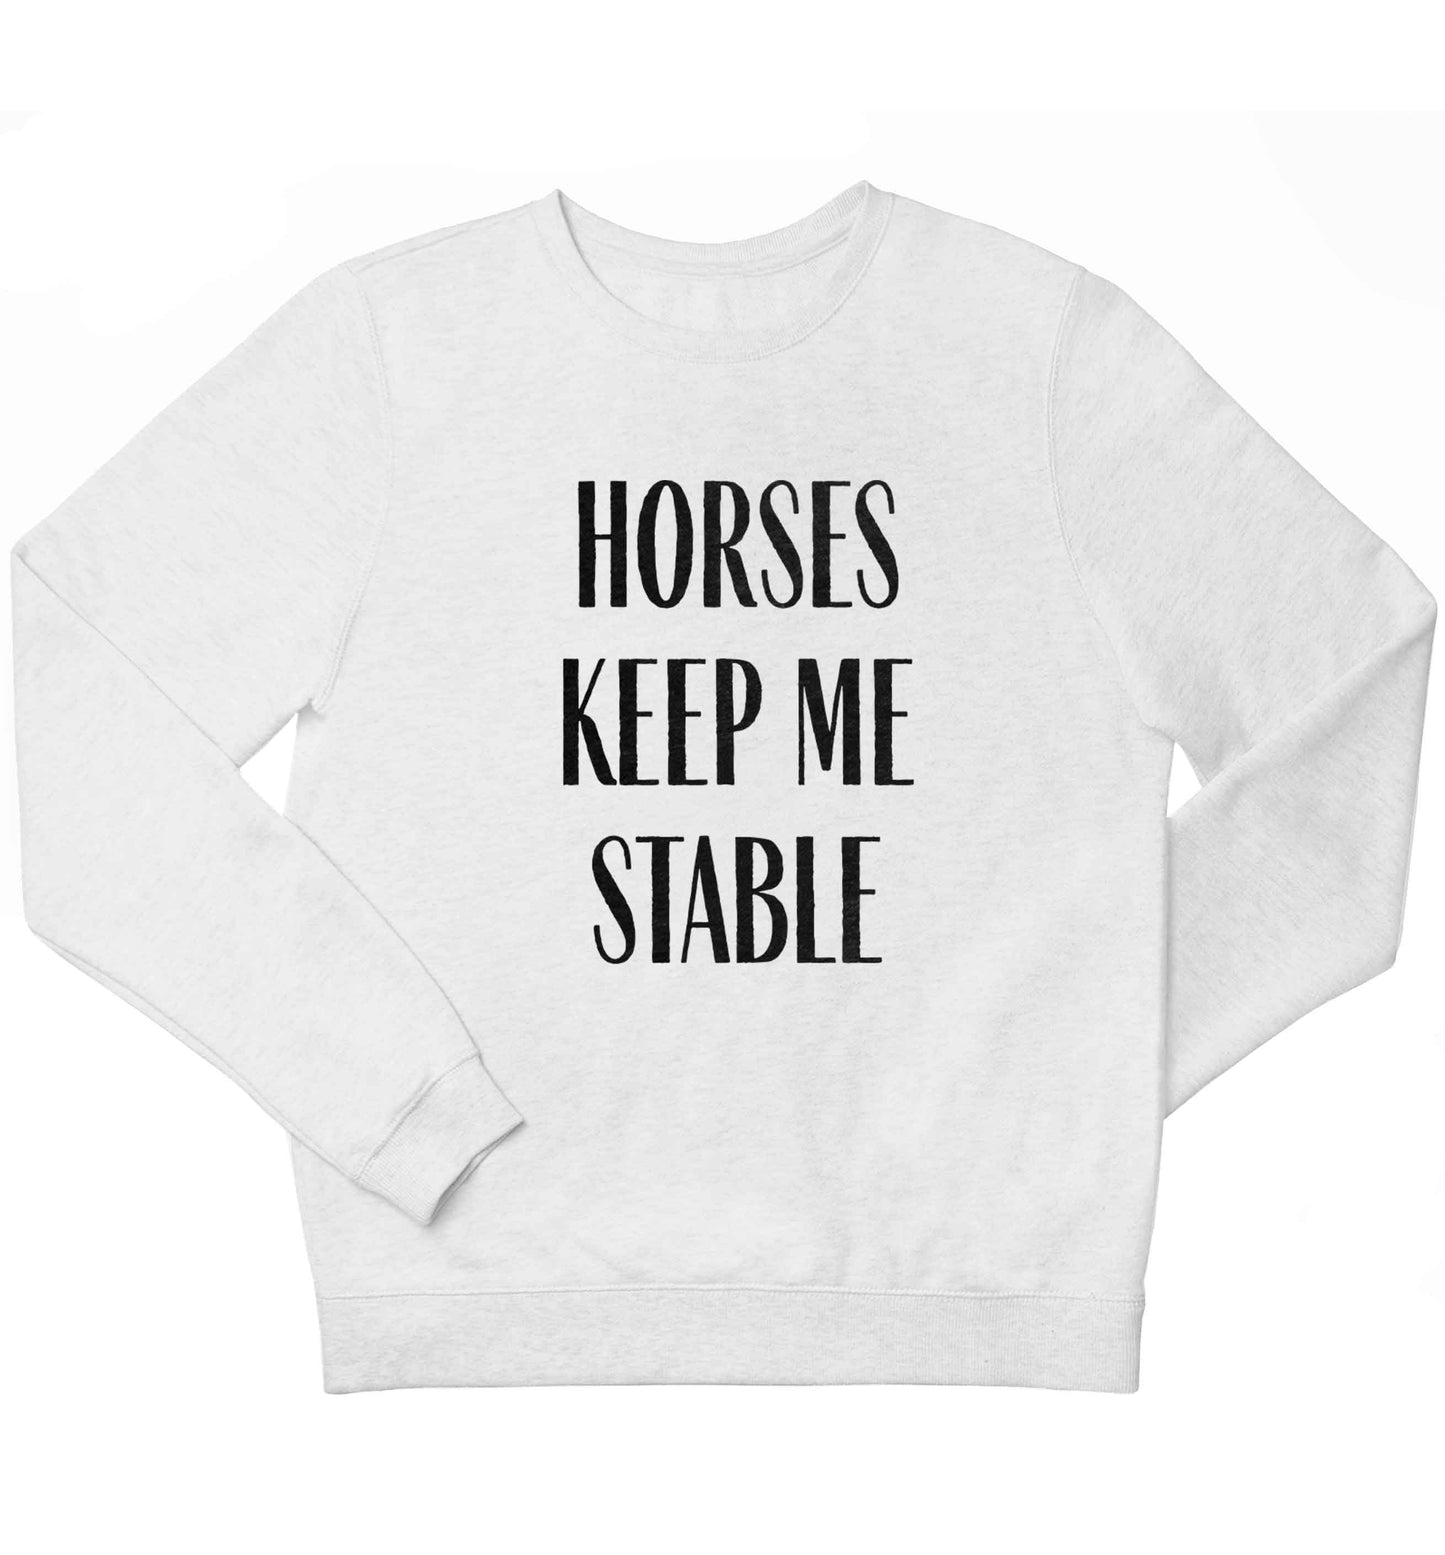 Horses keep me stable children's white sweater 12-13 Years